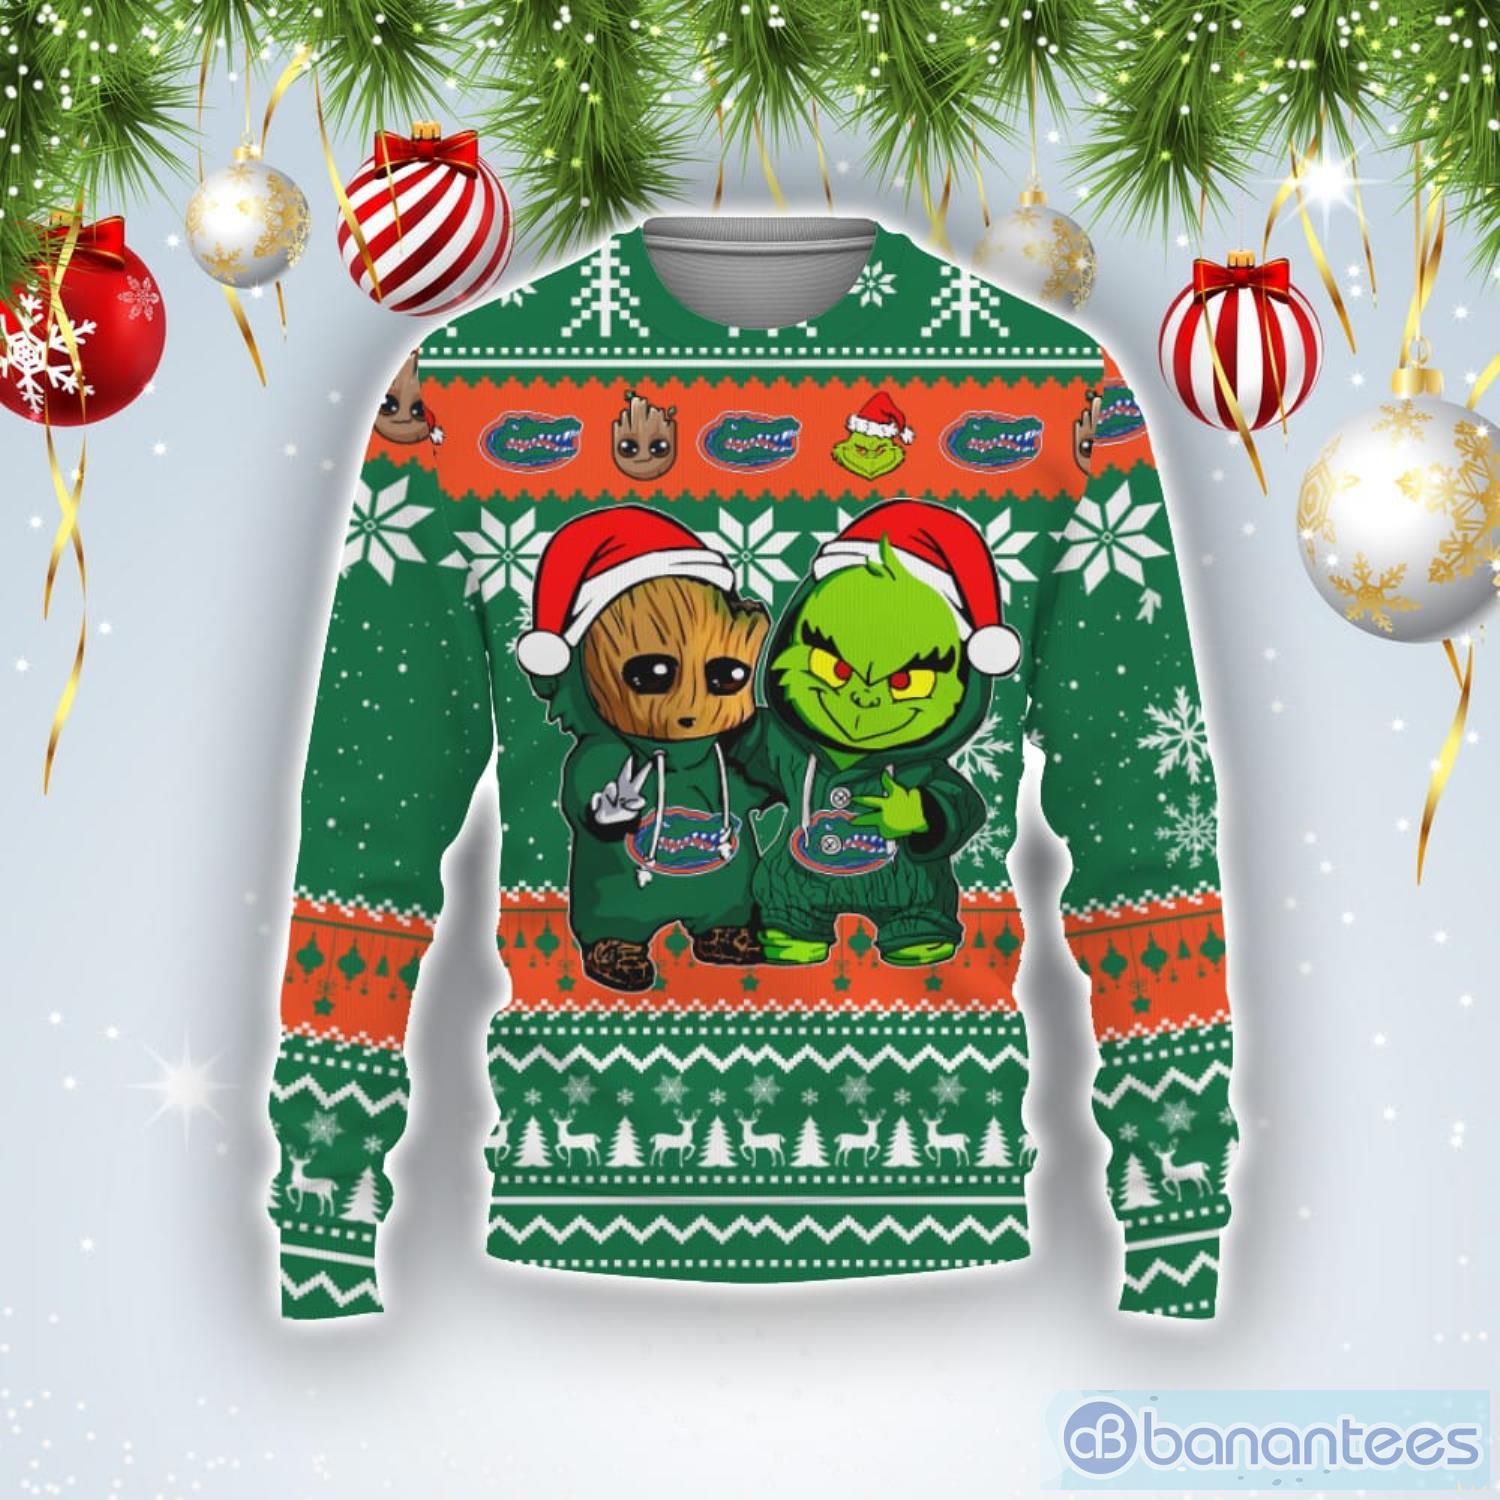 Florida Gators Baby Groot And Grinch Best Friends Football American Ugly Christmas Sweater Product Photo 1